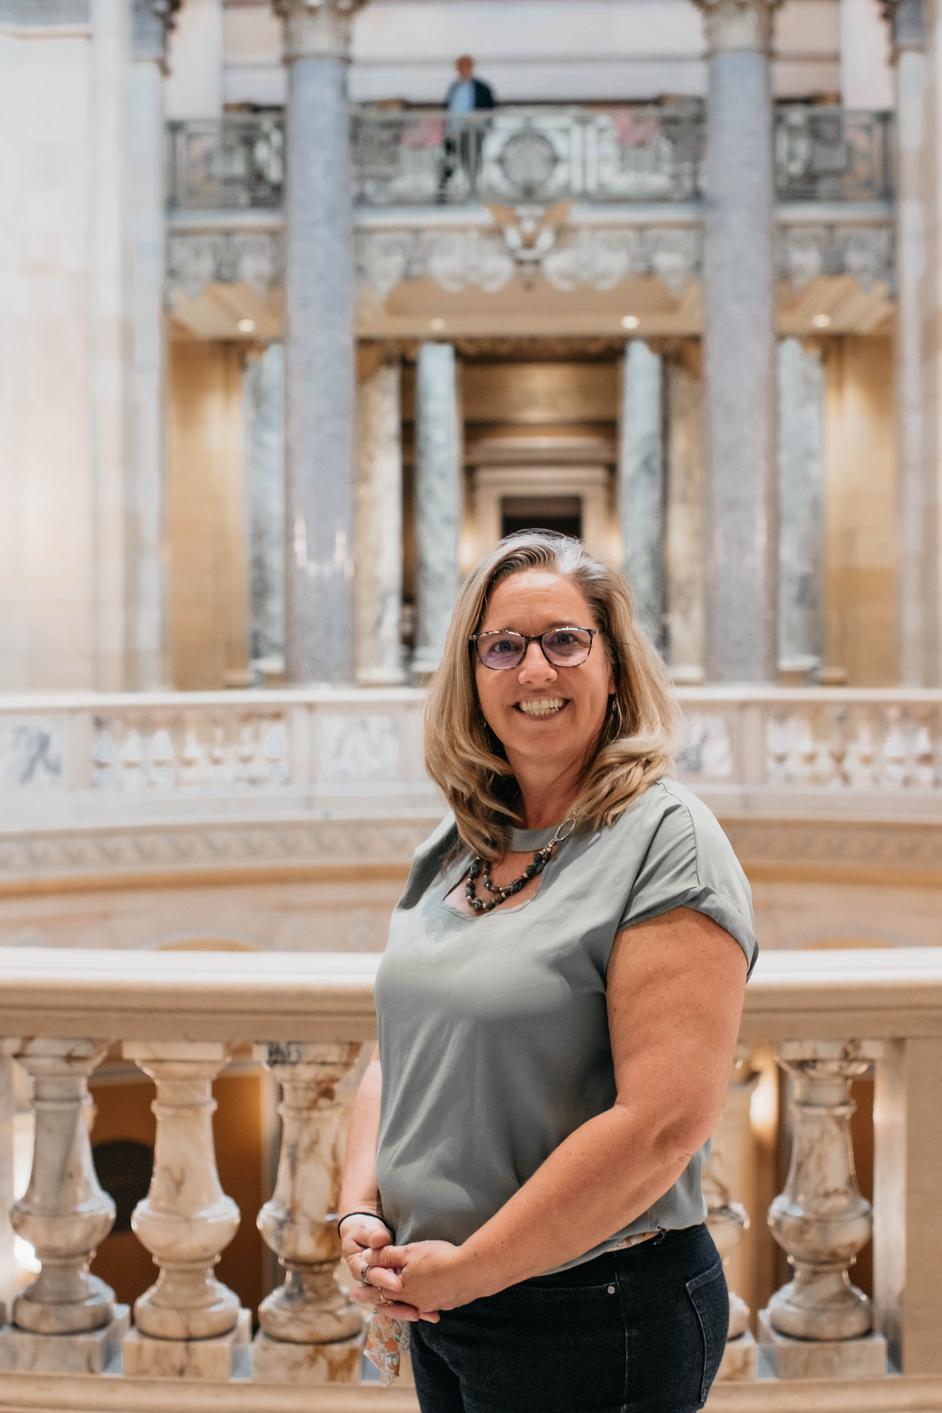 Brenda is wearing a gray business shirt and smiling. She is inside the Capitol with the Rotunda behind her.